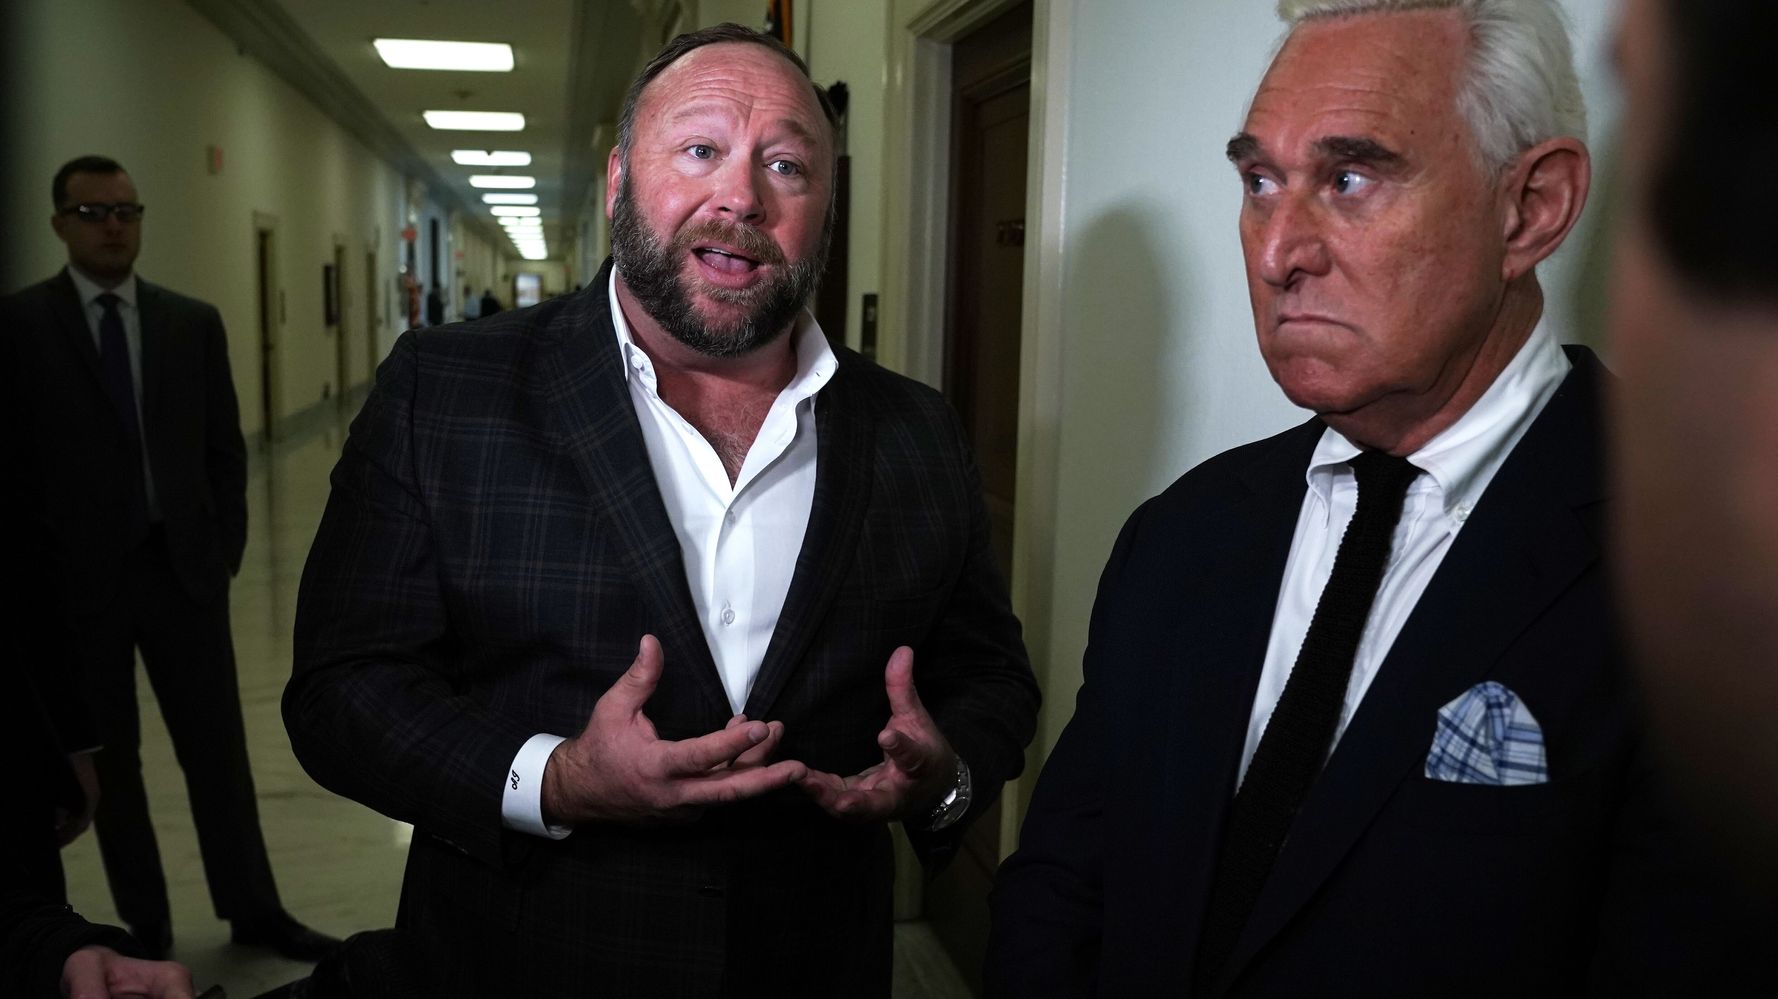 Alex Jones sent ‘intimate photo’ of his wife to Roger Stone, says lawyer